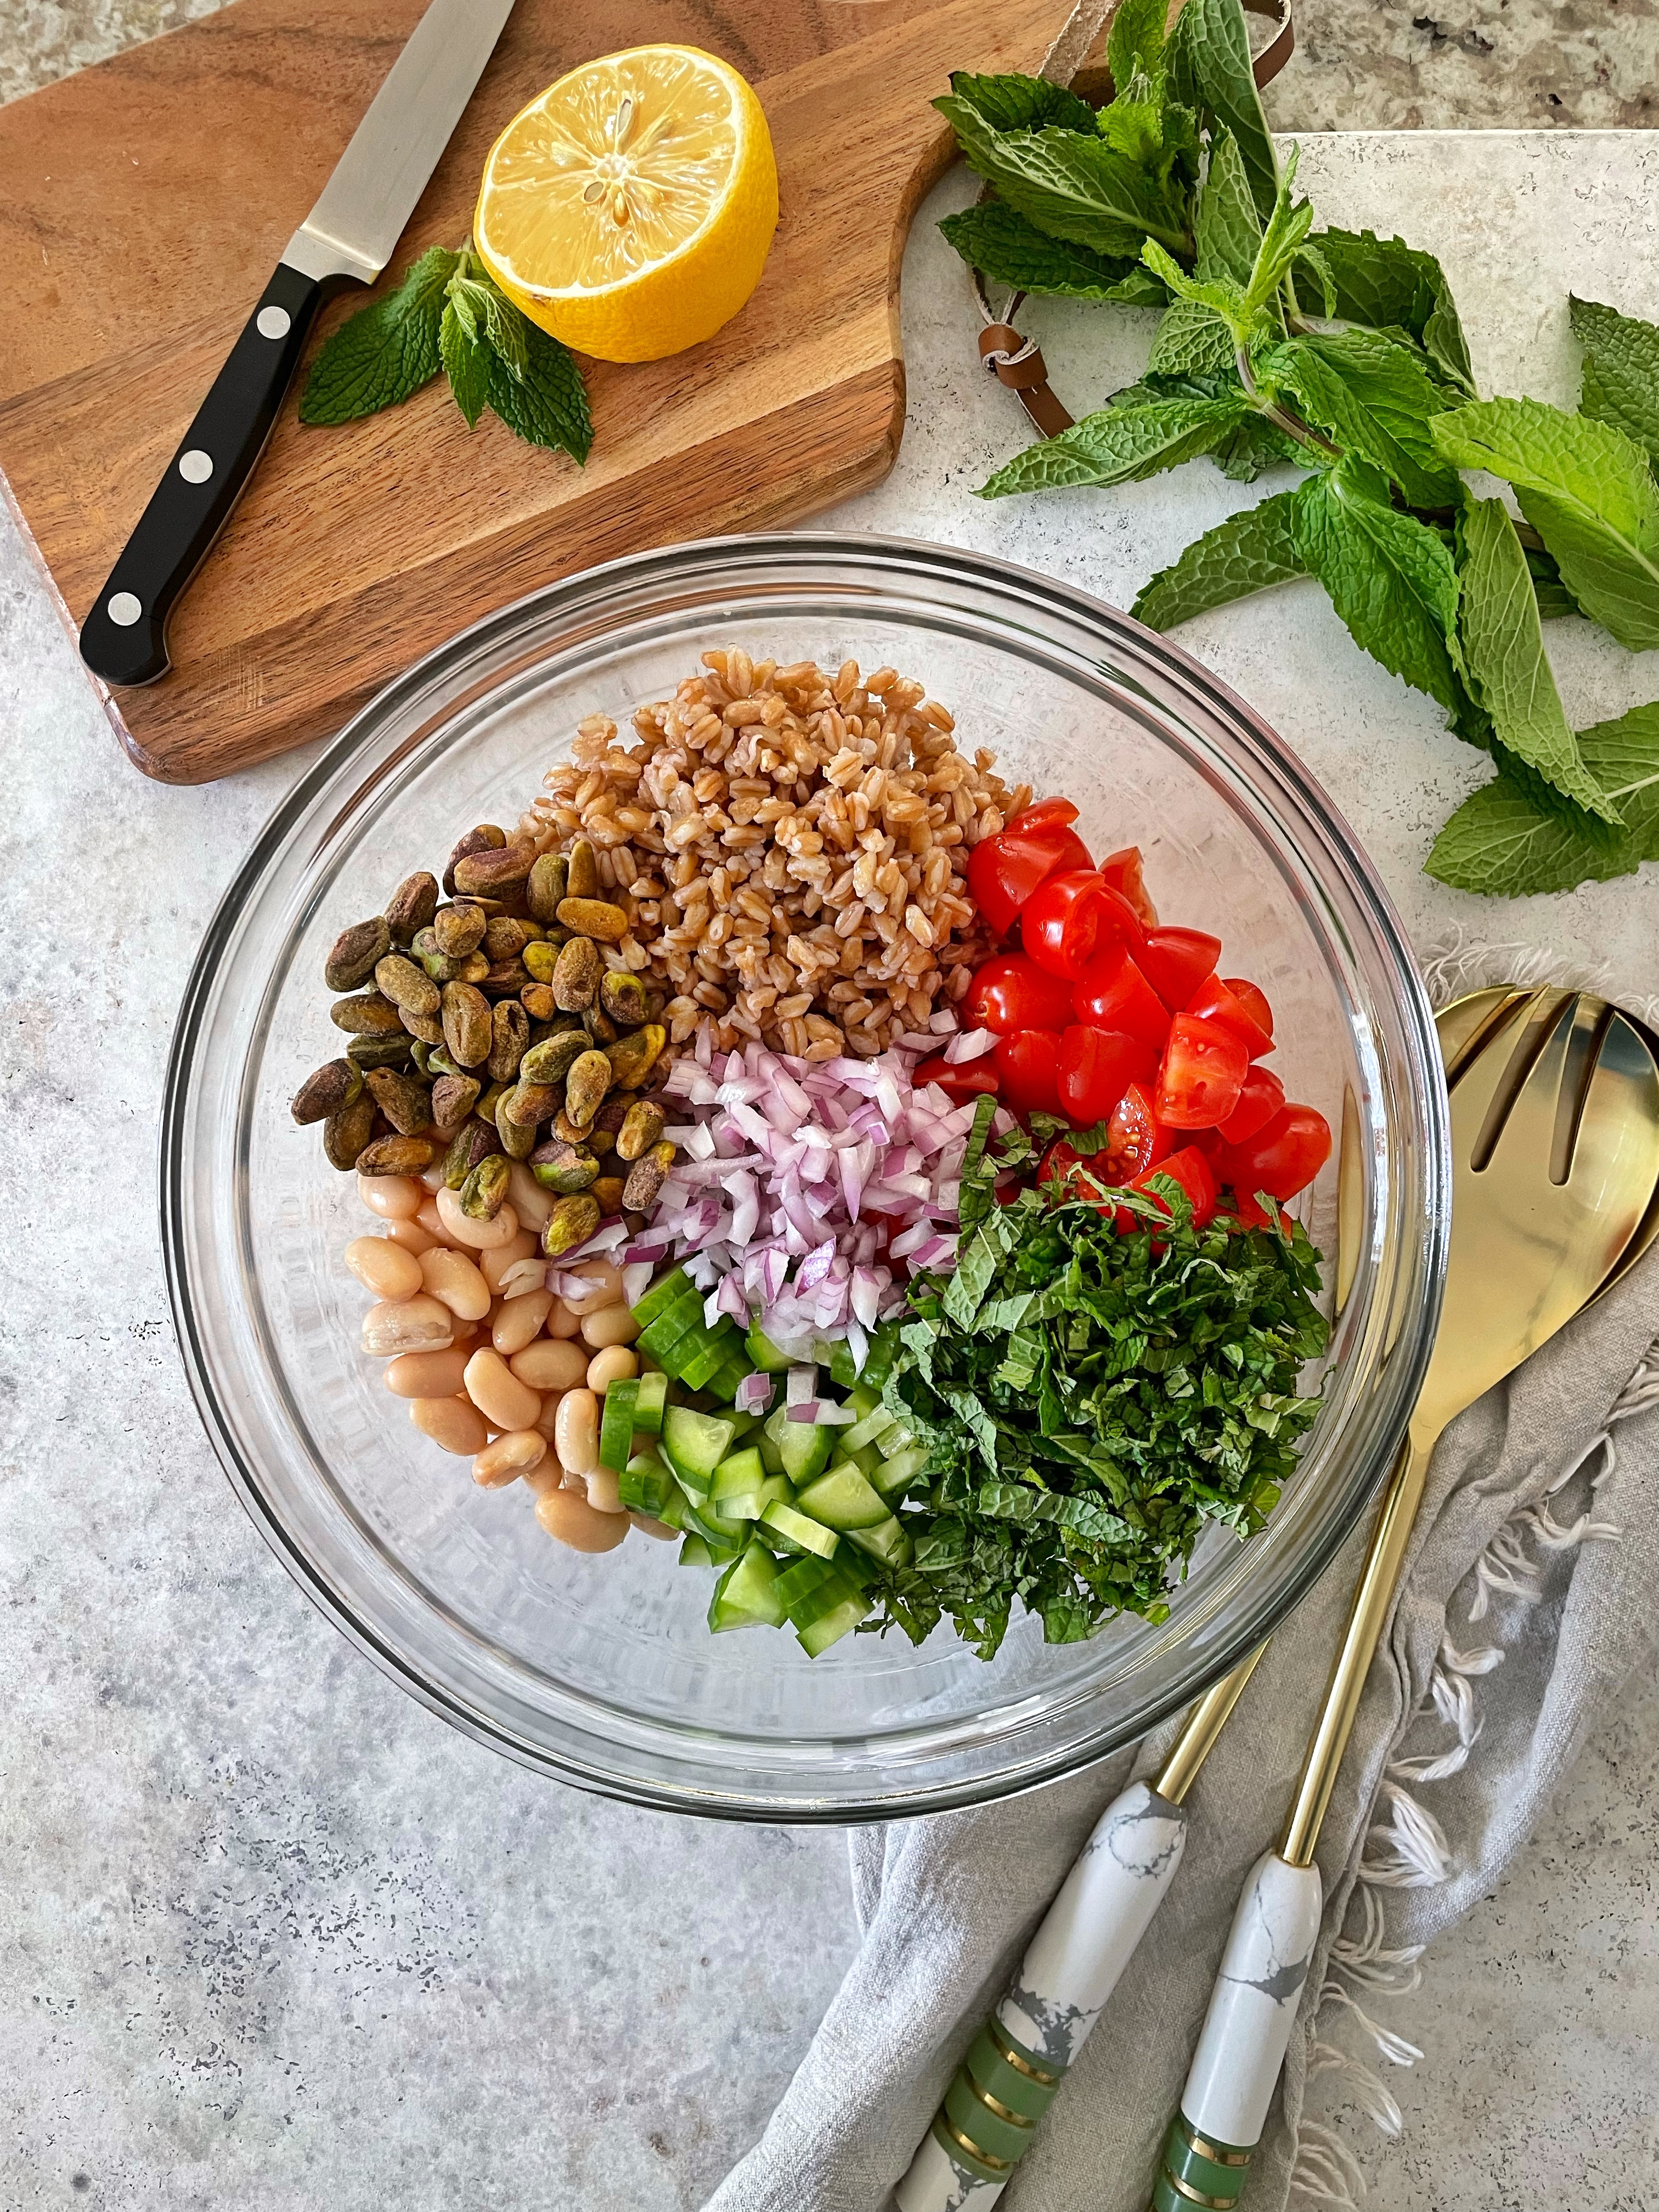 Assembled bowl of salad ingredients with no dressing